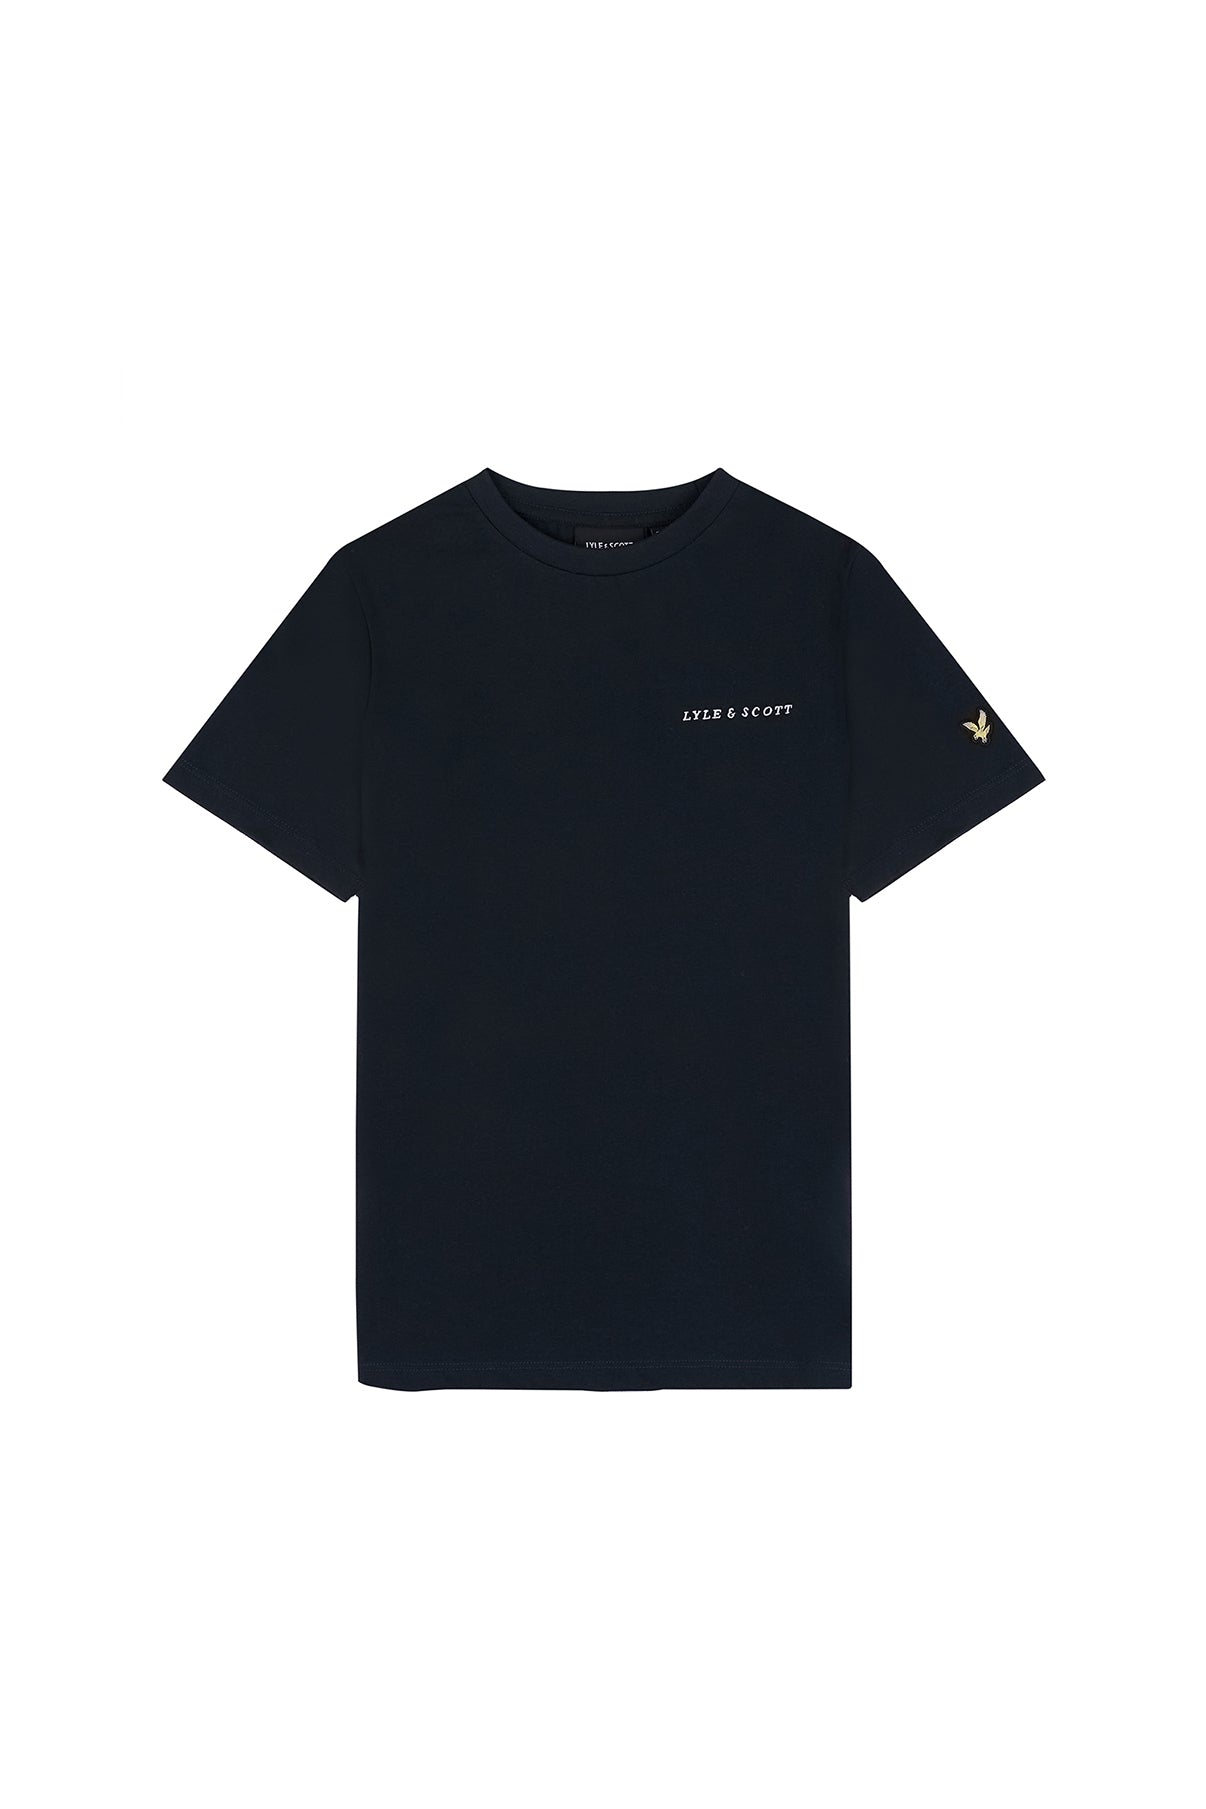 Lyle & Scott Limited T-shirt Script Embroidered